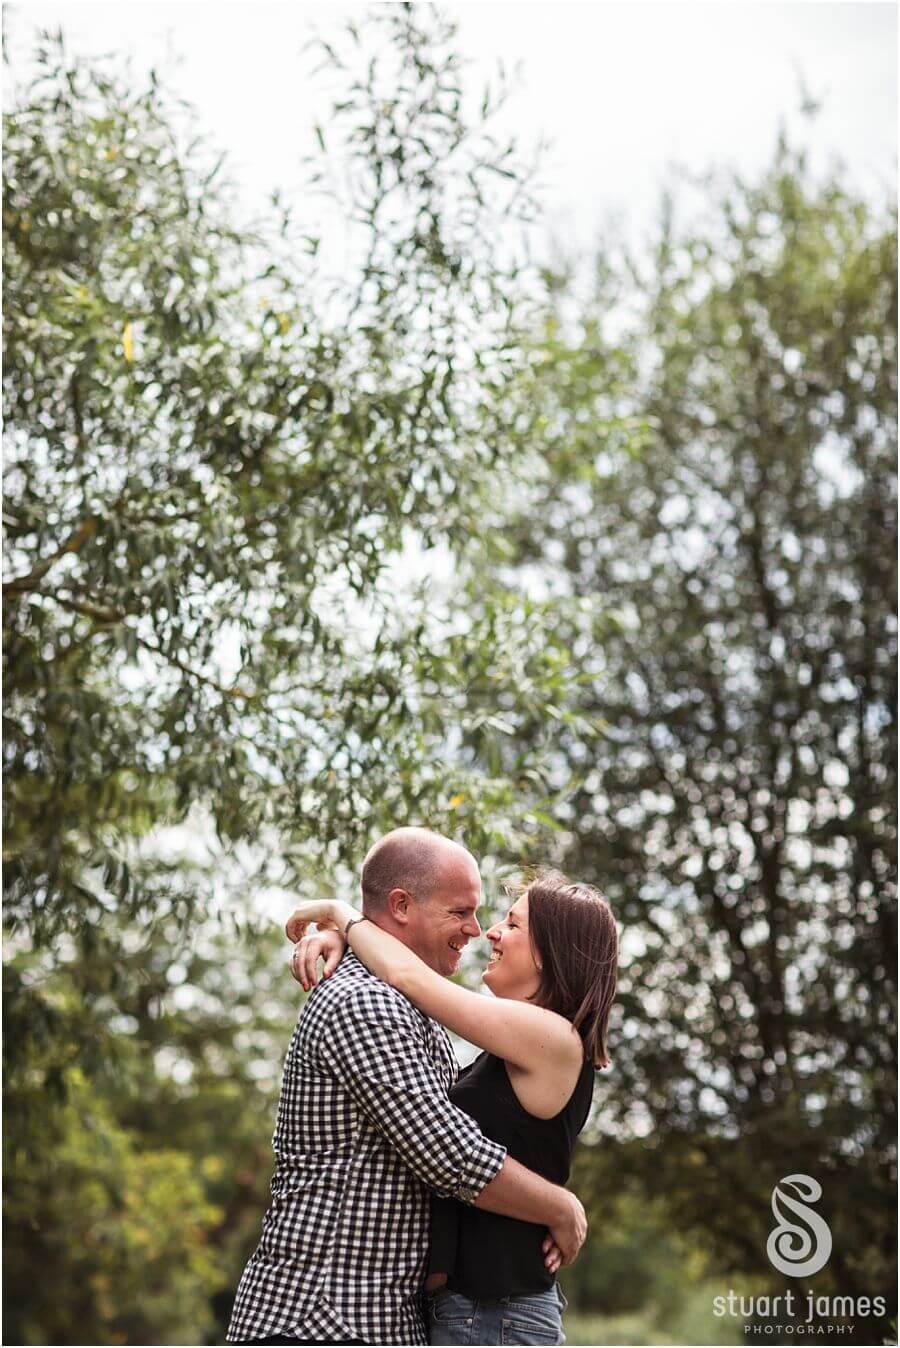 Contemporary and relaxed engagement portraits in Epping Forest in nr Walthamstow, London by Walthamstow Documentary Wedding Photographer Stuart James